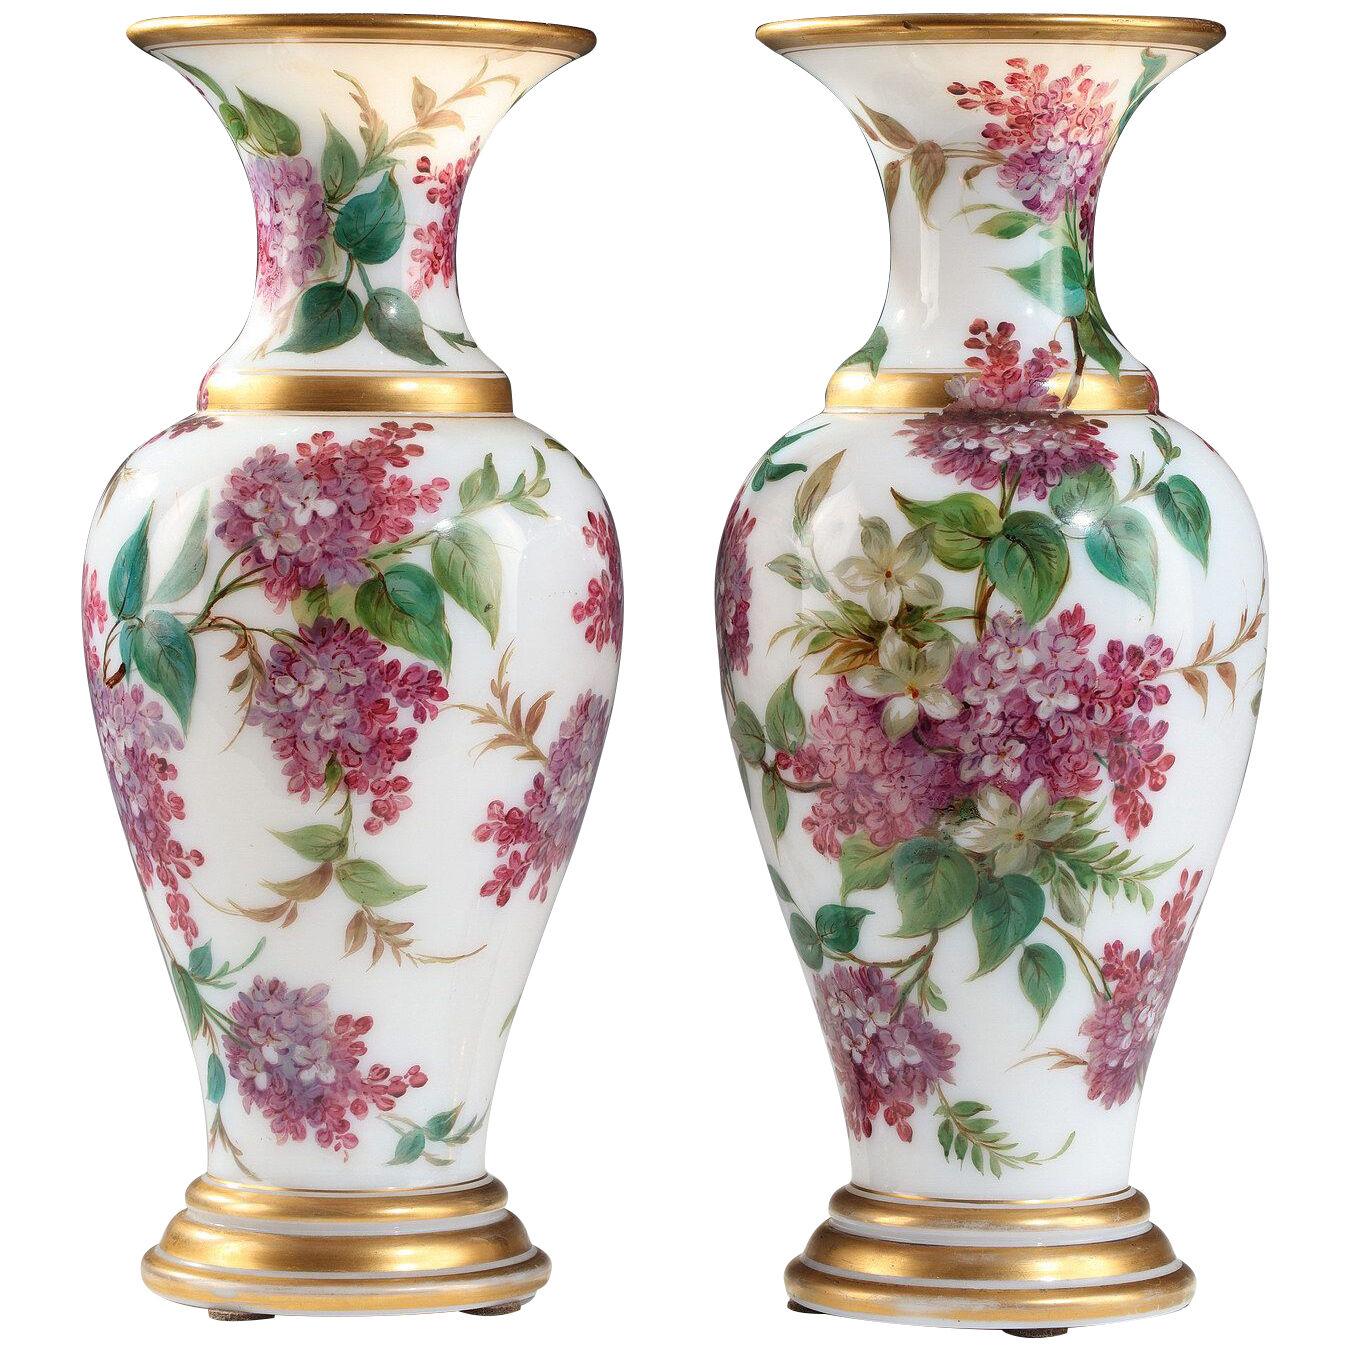 Pair of Opal Glass Vases Attributed to Baccarat, France, Circa 1860